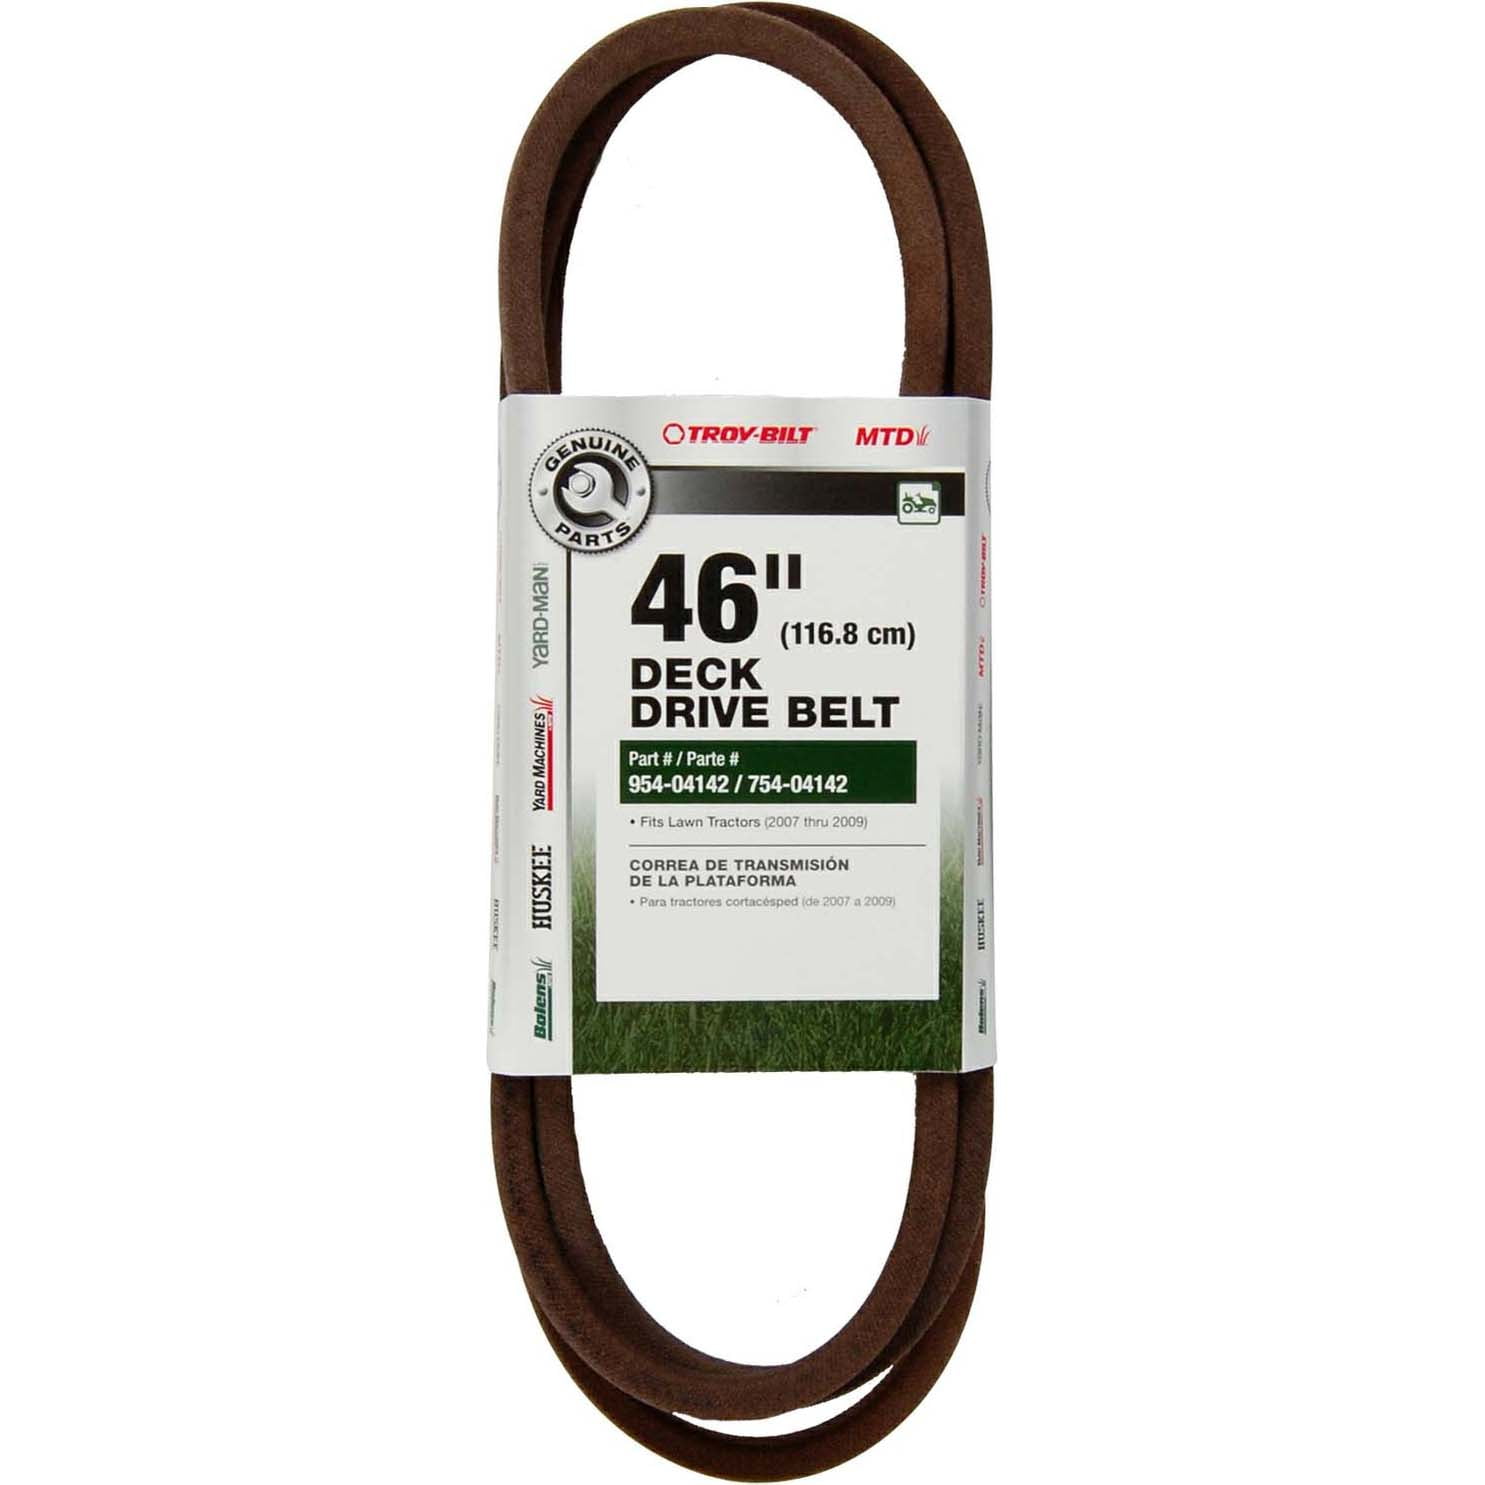 A-7540439 Lawn and Garden Machinery V-Belt Fits MTD 